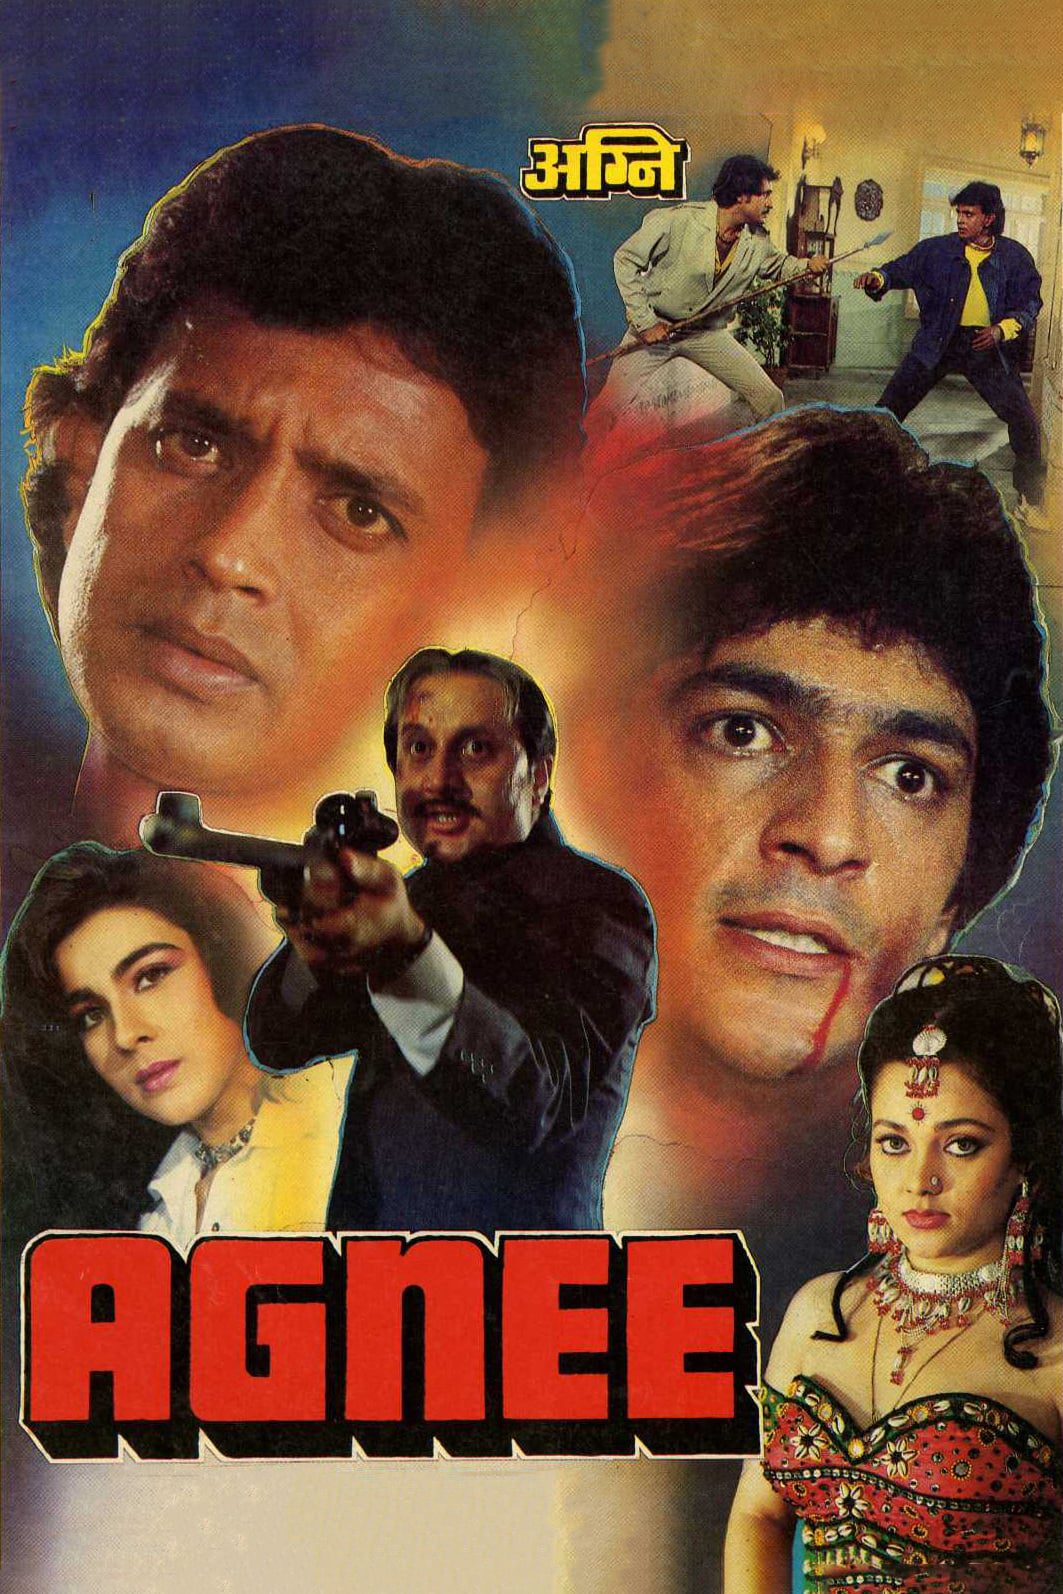 Poster for the movie "Agnee"